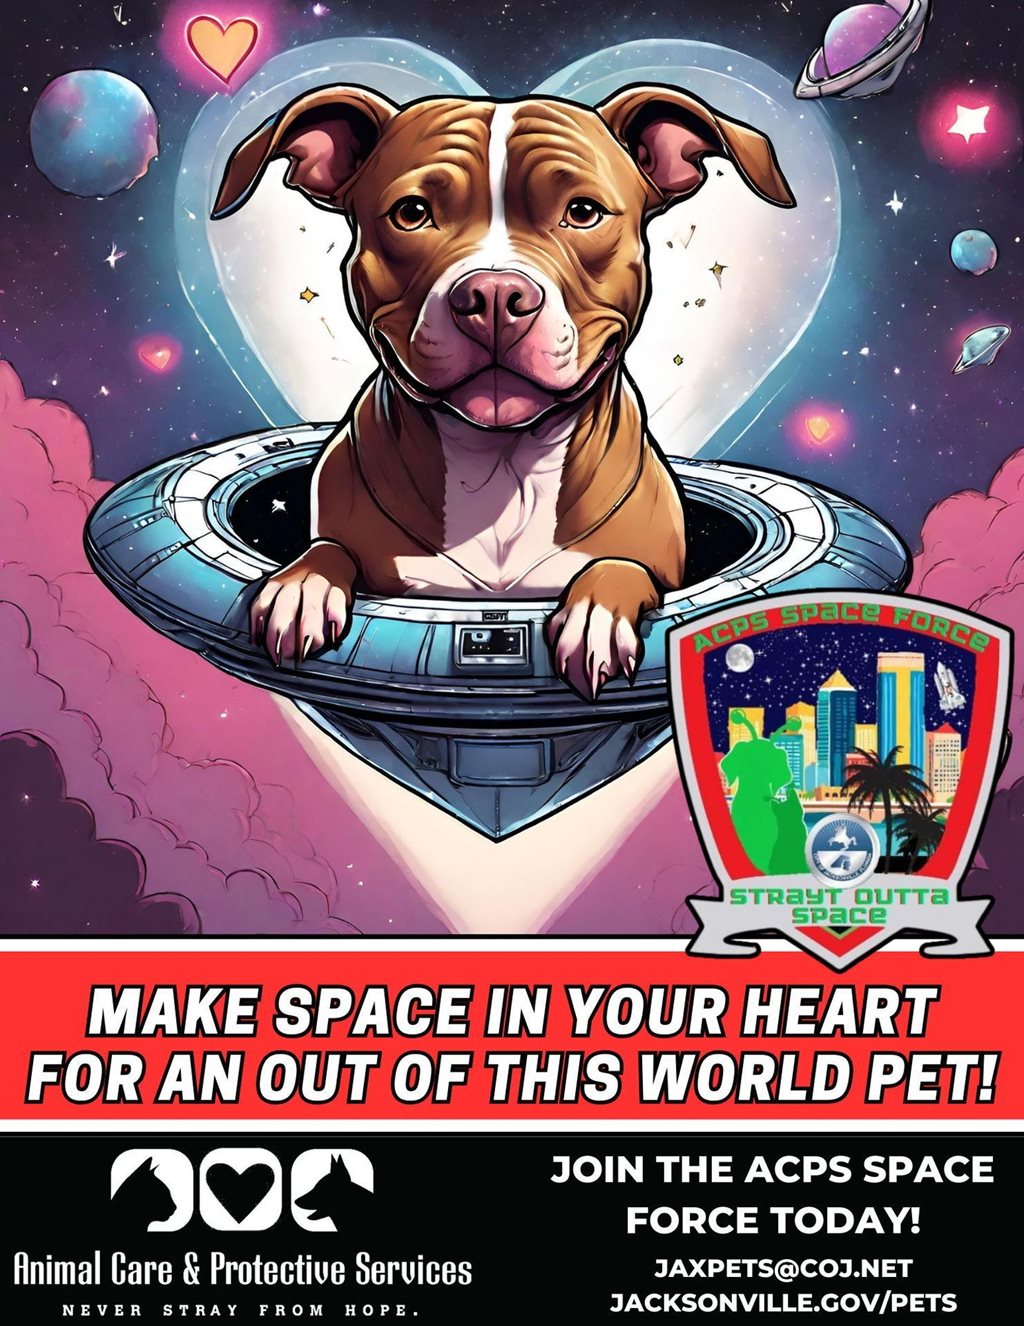 acps space force ad with pitbull riding in space ship